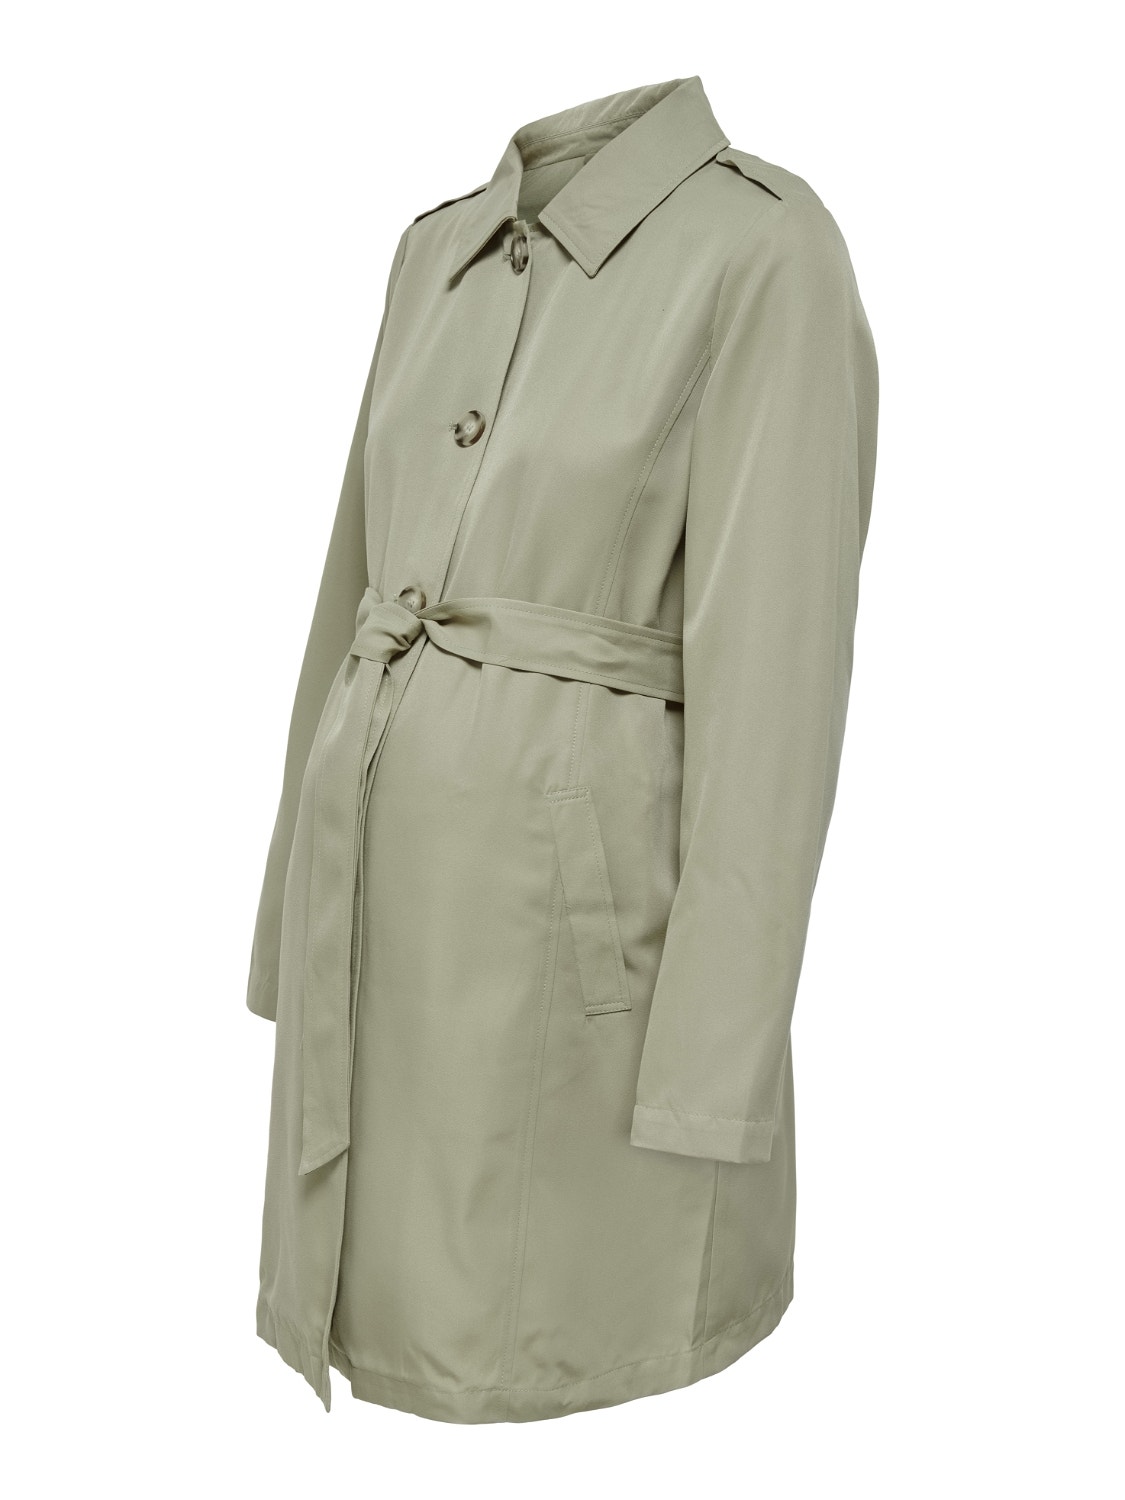 ONLY Trenchcoat -Slate Green - 15256984